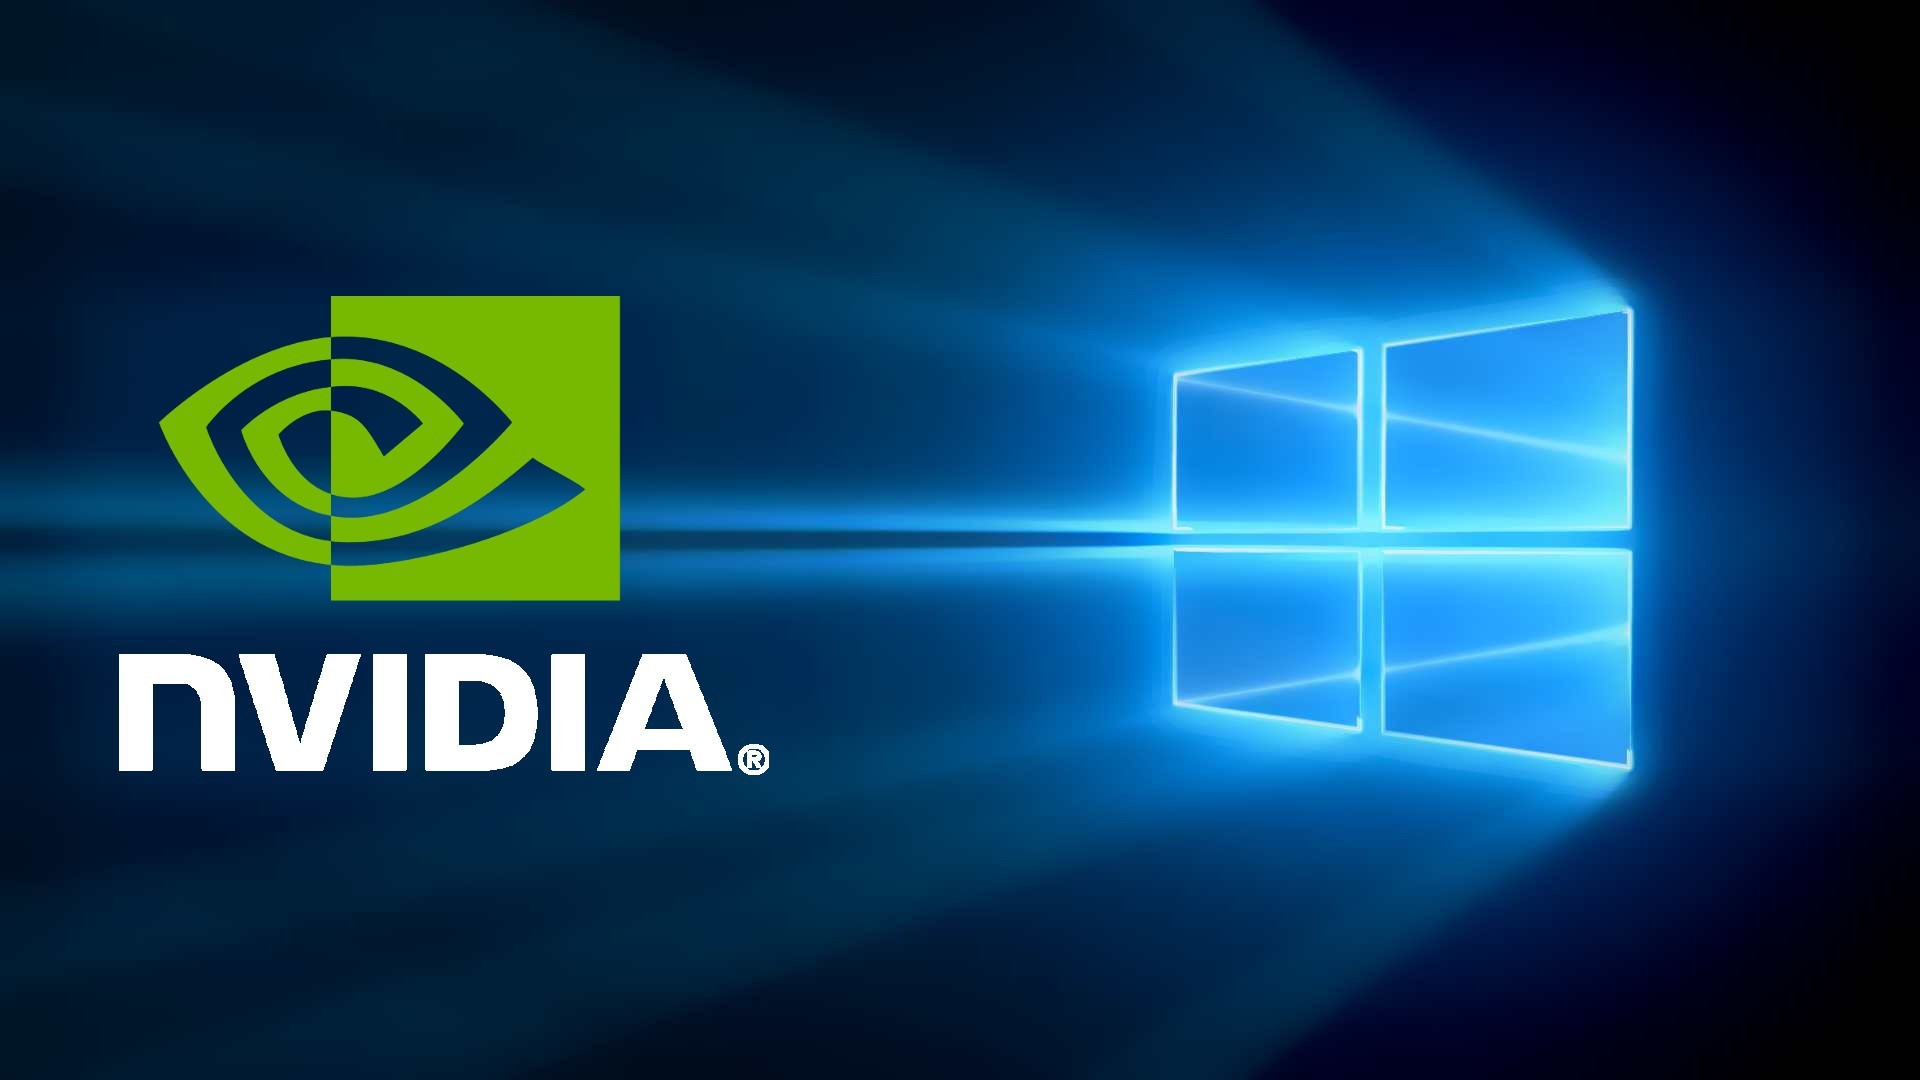 1920x1080 Windows 10 Creators Update need to install these new NVIDIA drivers